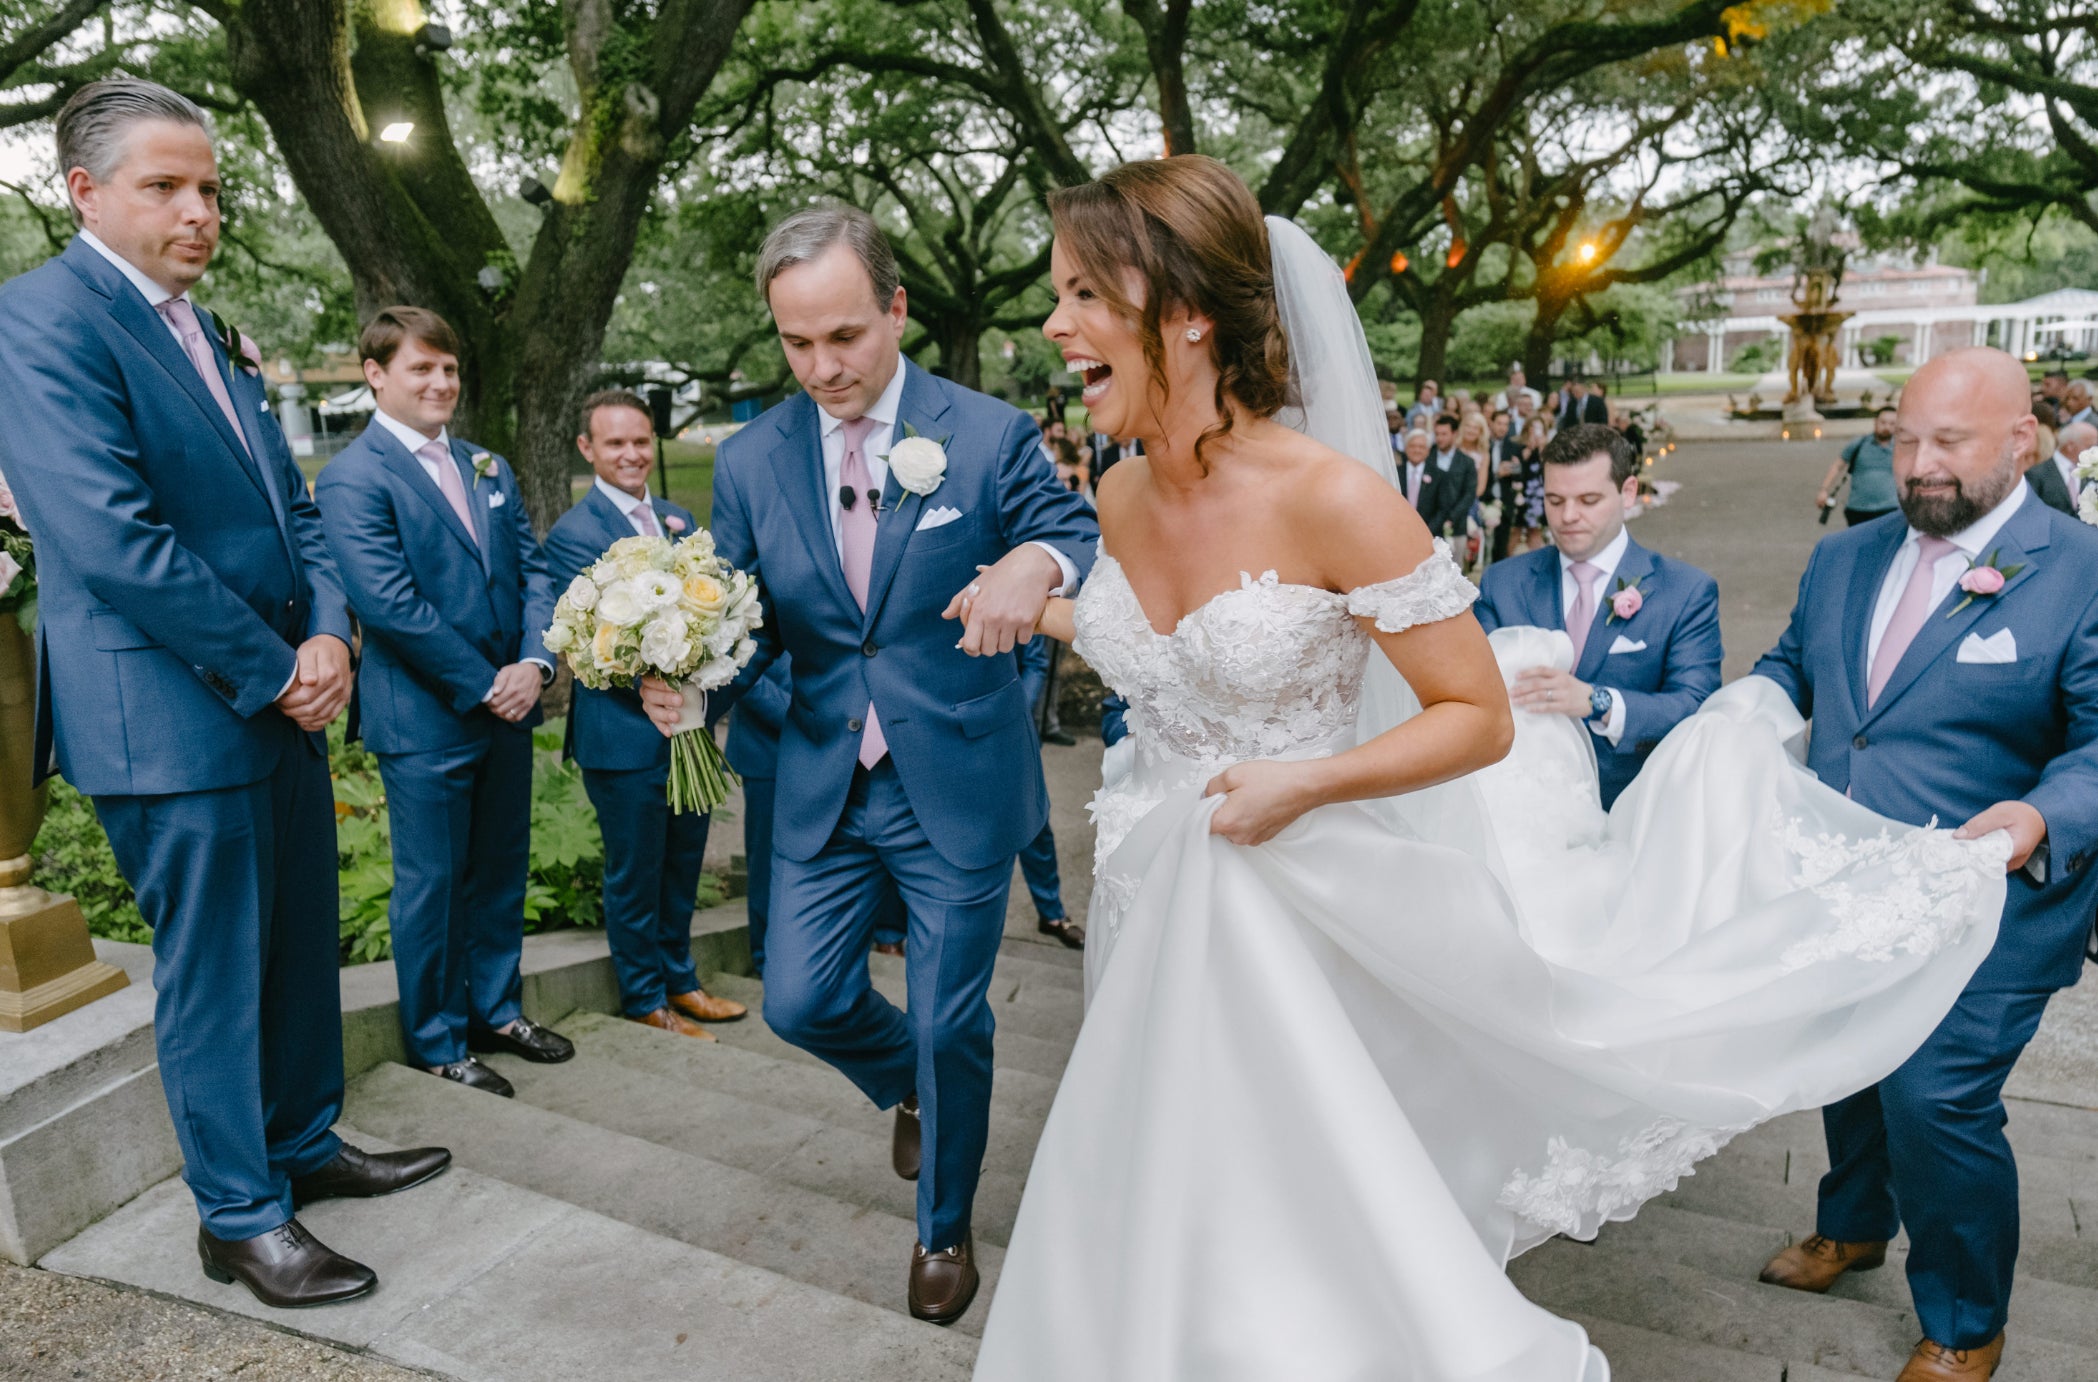 Pickett's Press Wedding Real Bride - These Big Apples turned their Big Day into an unforgettable Big Easy Experience. Try saying that five times fast! The energy of the wedding was at an all-time high and nothing was short of extraordinary traditions.